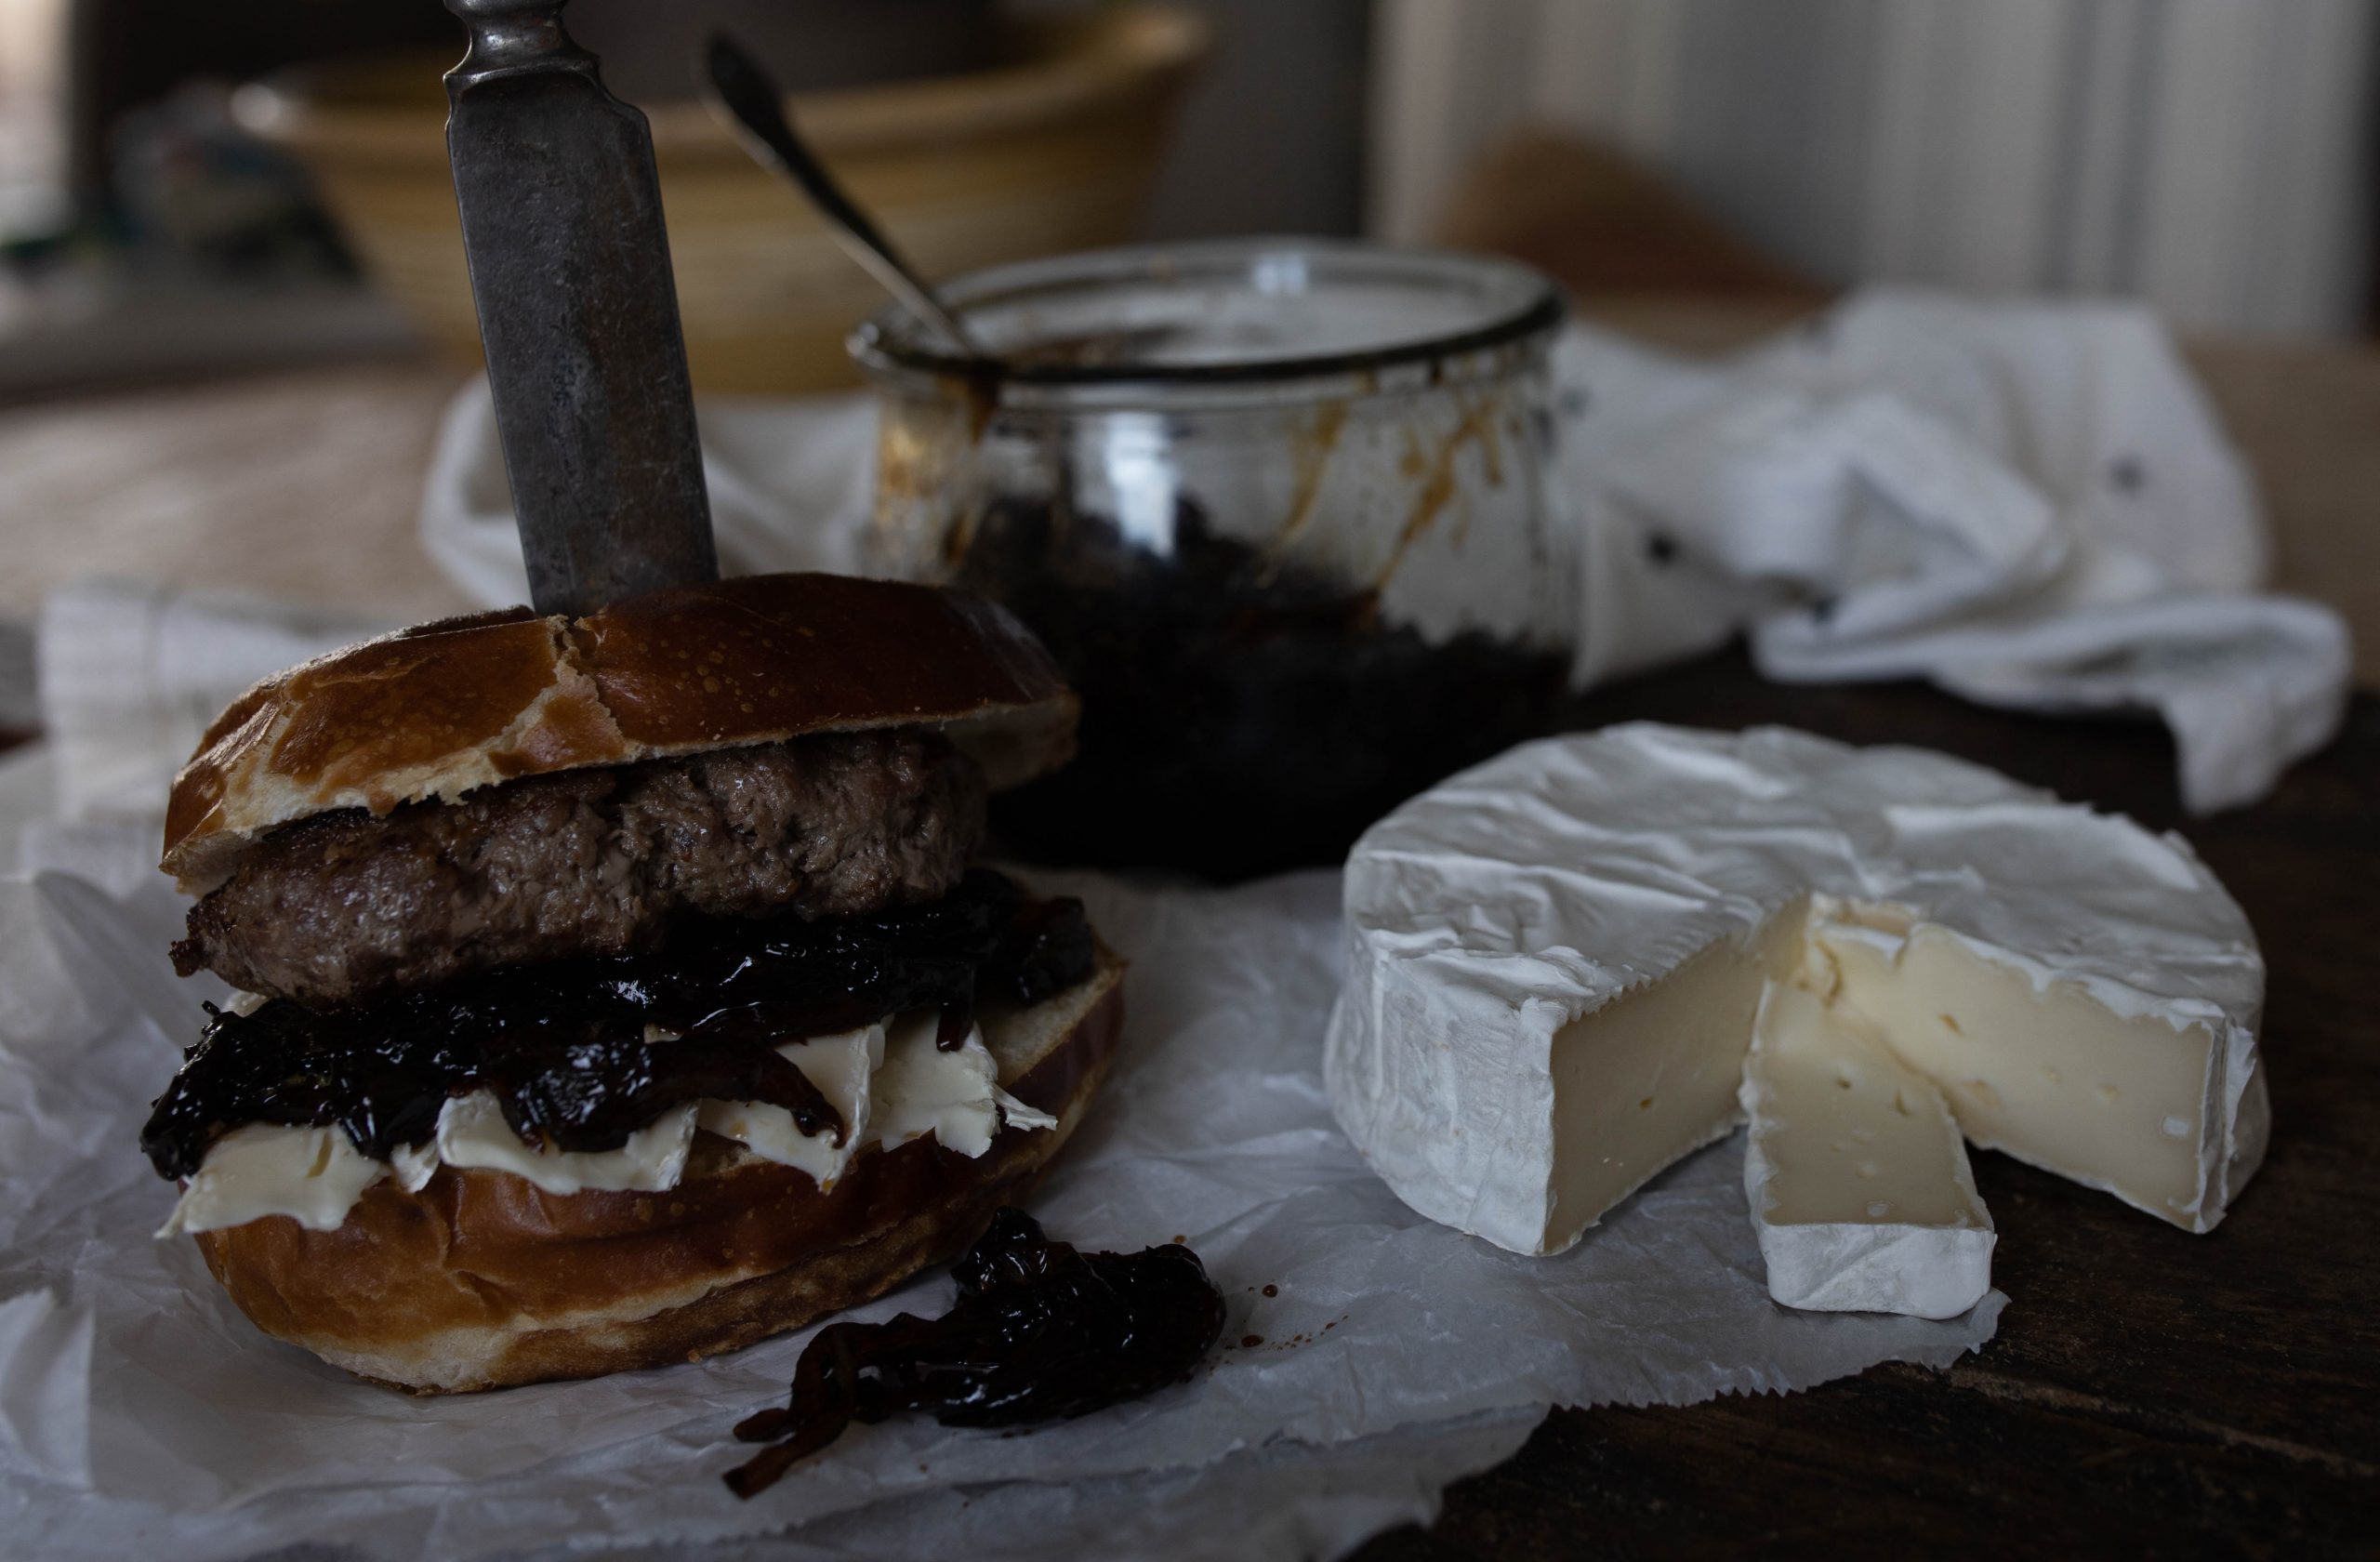 Brie and Onion Jam Burgers